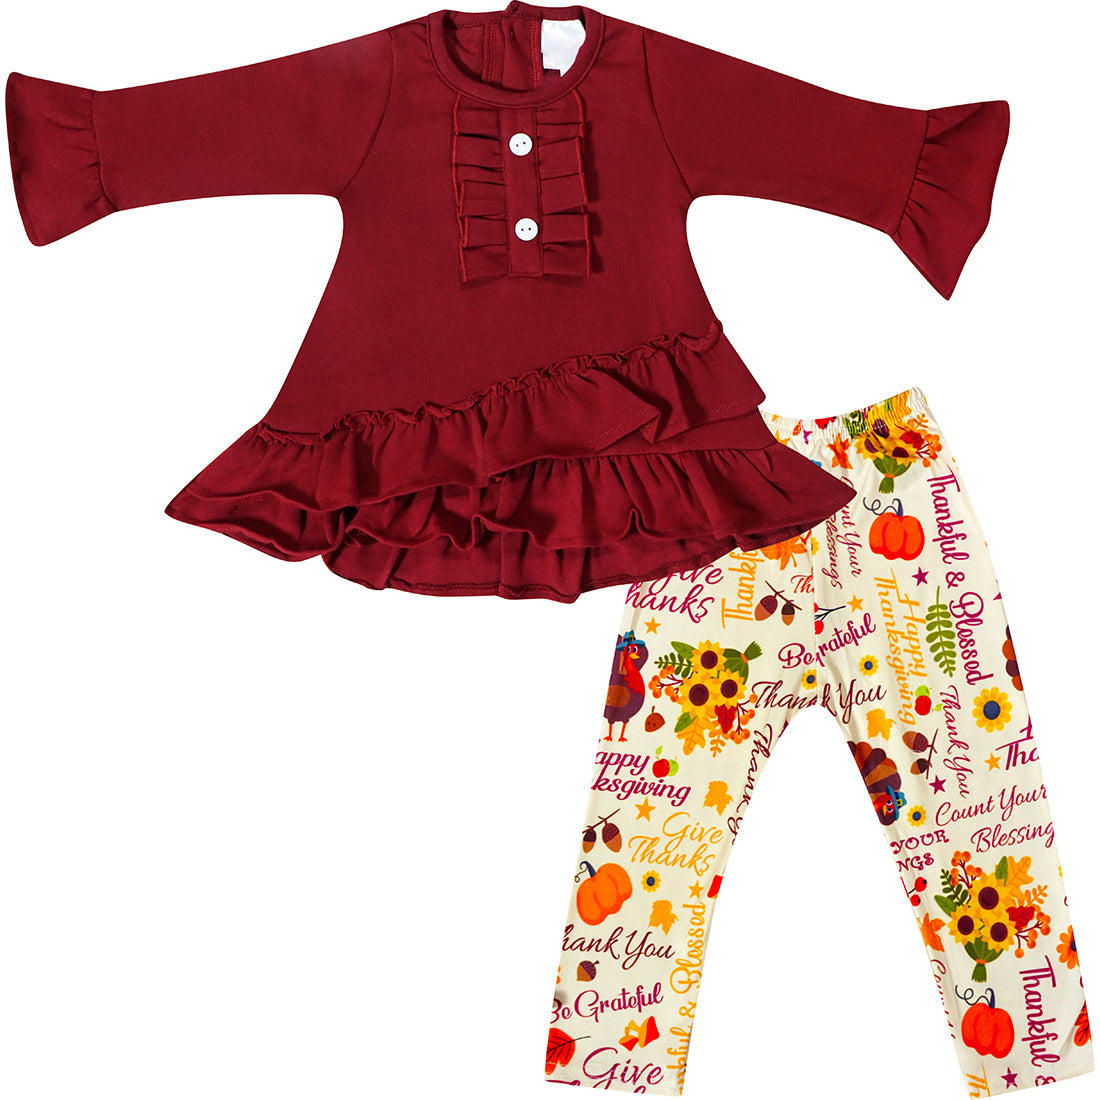 Baby Toddler Little Girls Thanksgiving Turkey Be Grateful Thankful Blessed Boutique Outfit Set With Scarf - Burgundy - Angeline Kids